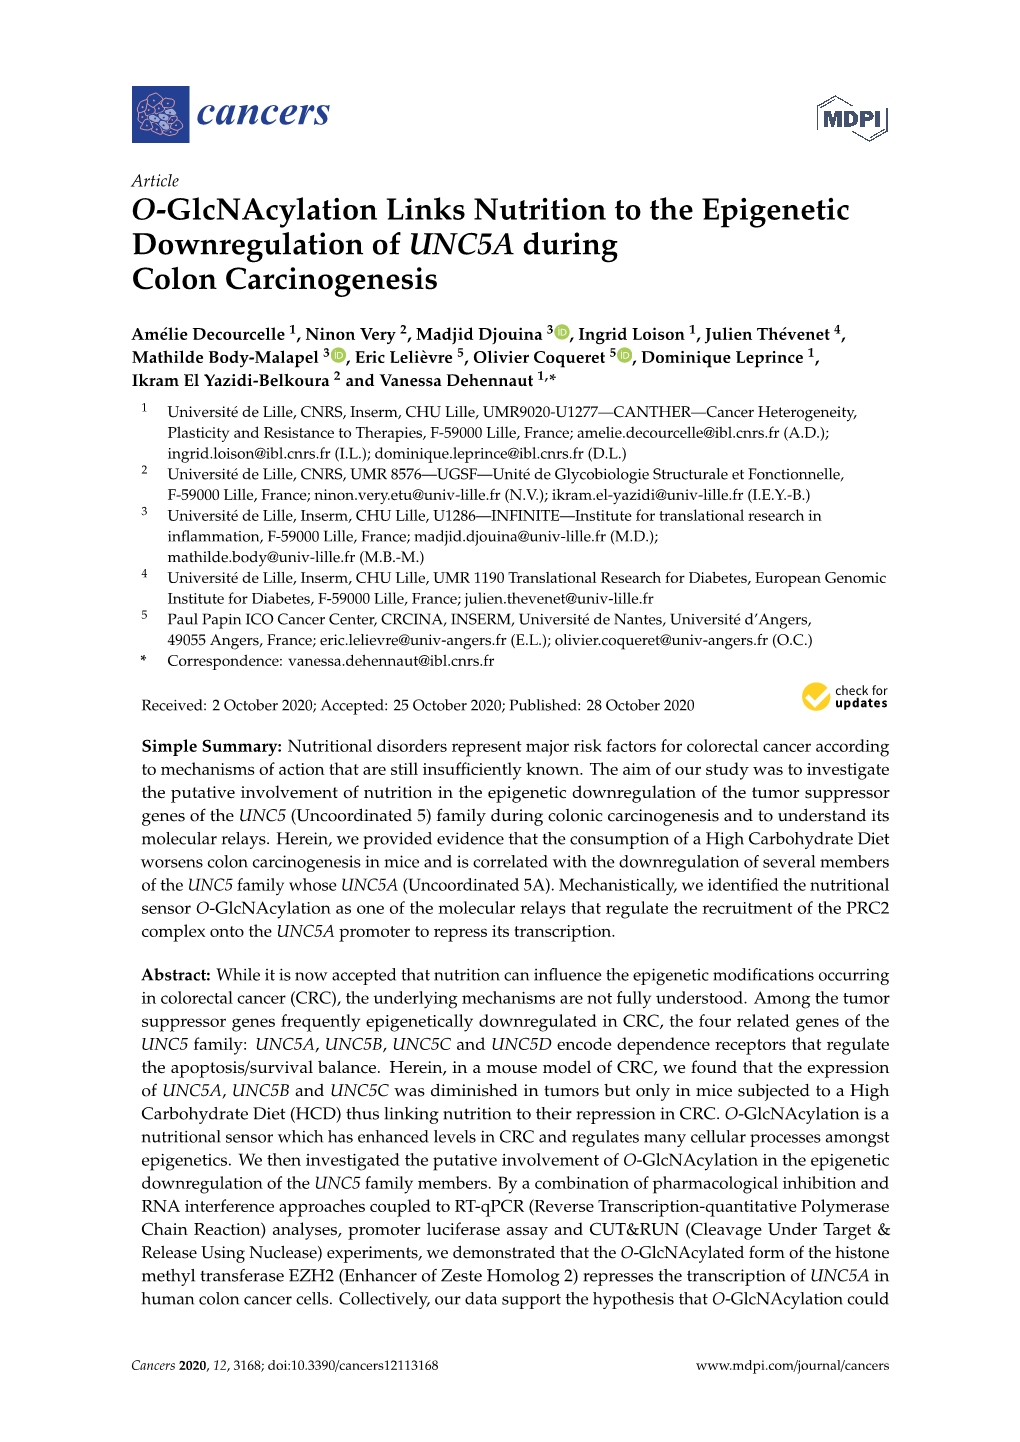 O-Glcnacylation Links Nutrition to the Epigenetic Downregulation of UNC5A During Colon Carcinogenesis